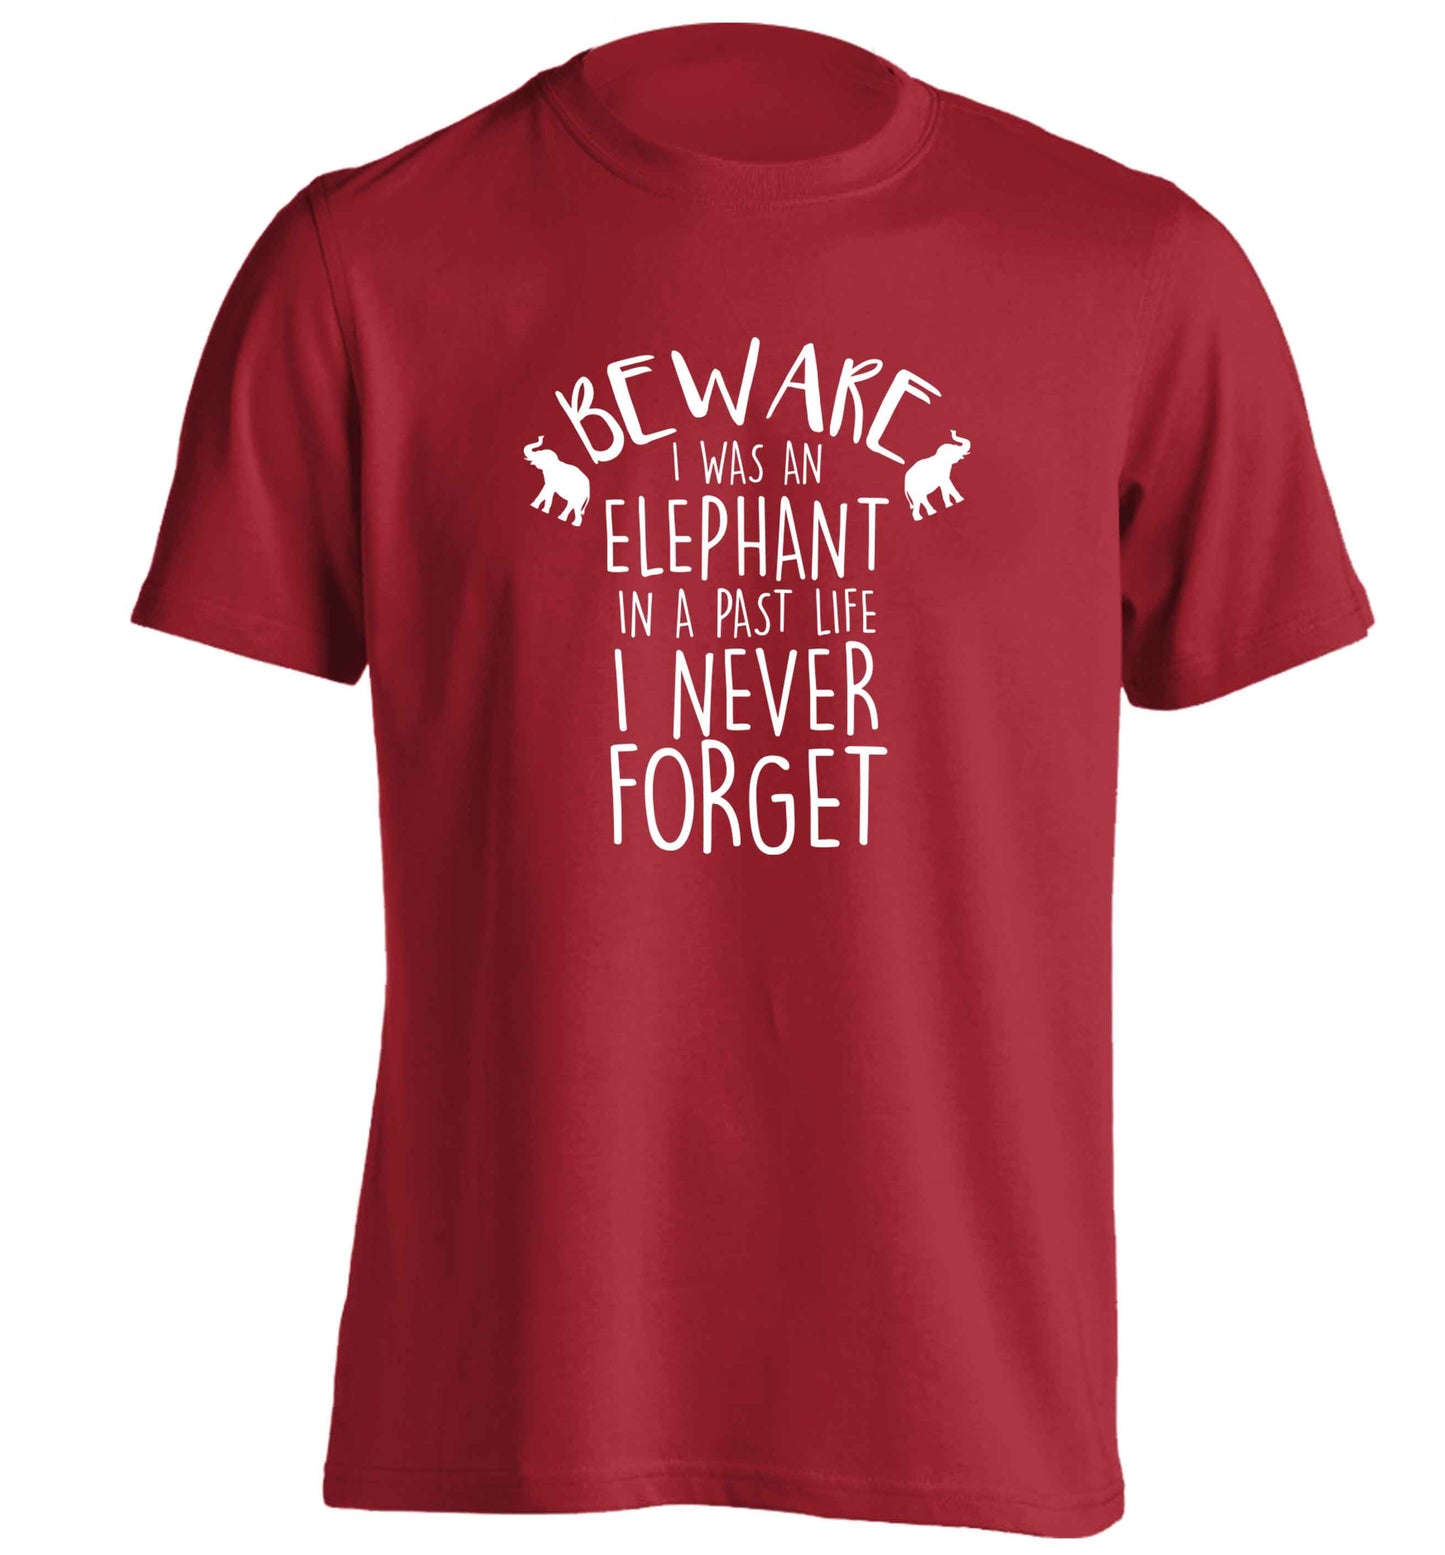 Beware I was an elephant in my past life I never forget adults unisex red Tshirt 2XL